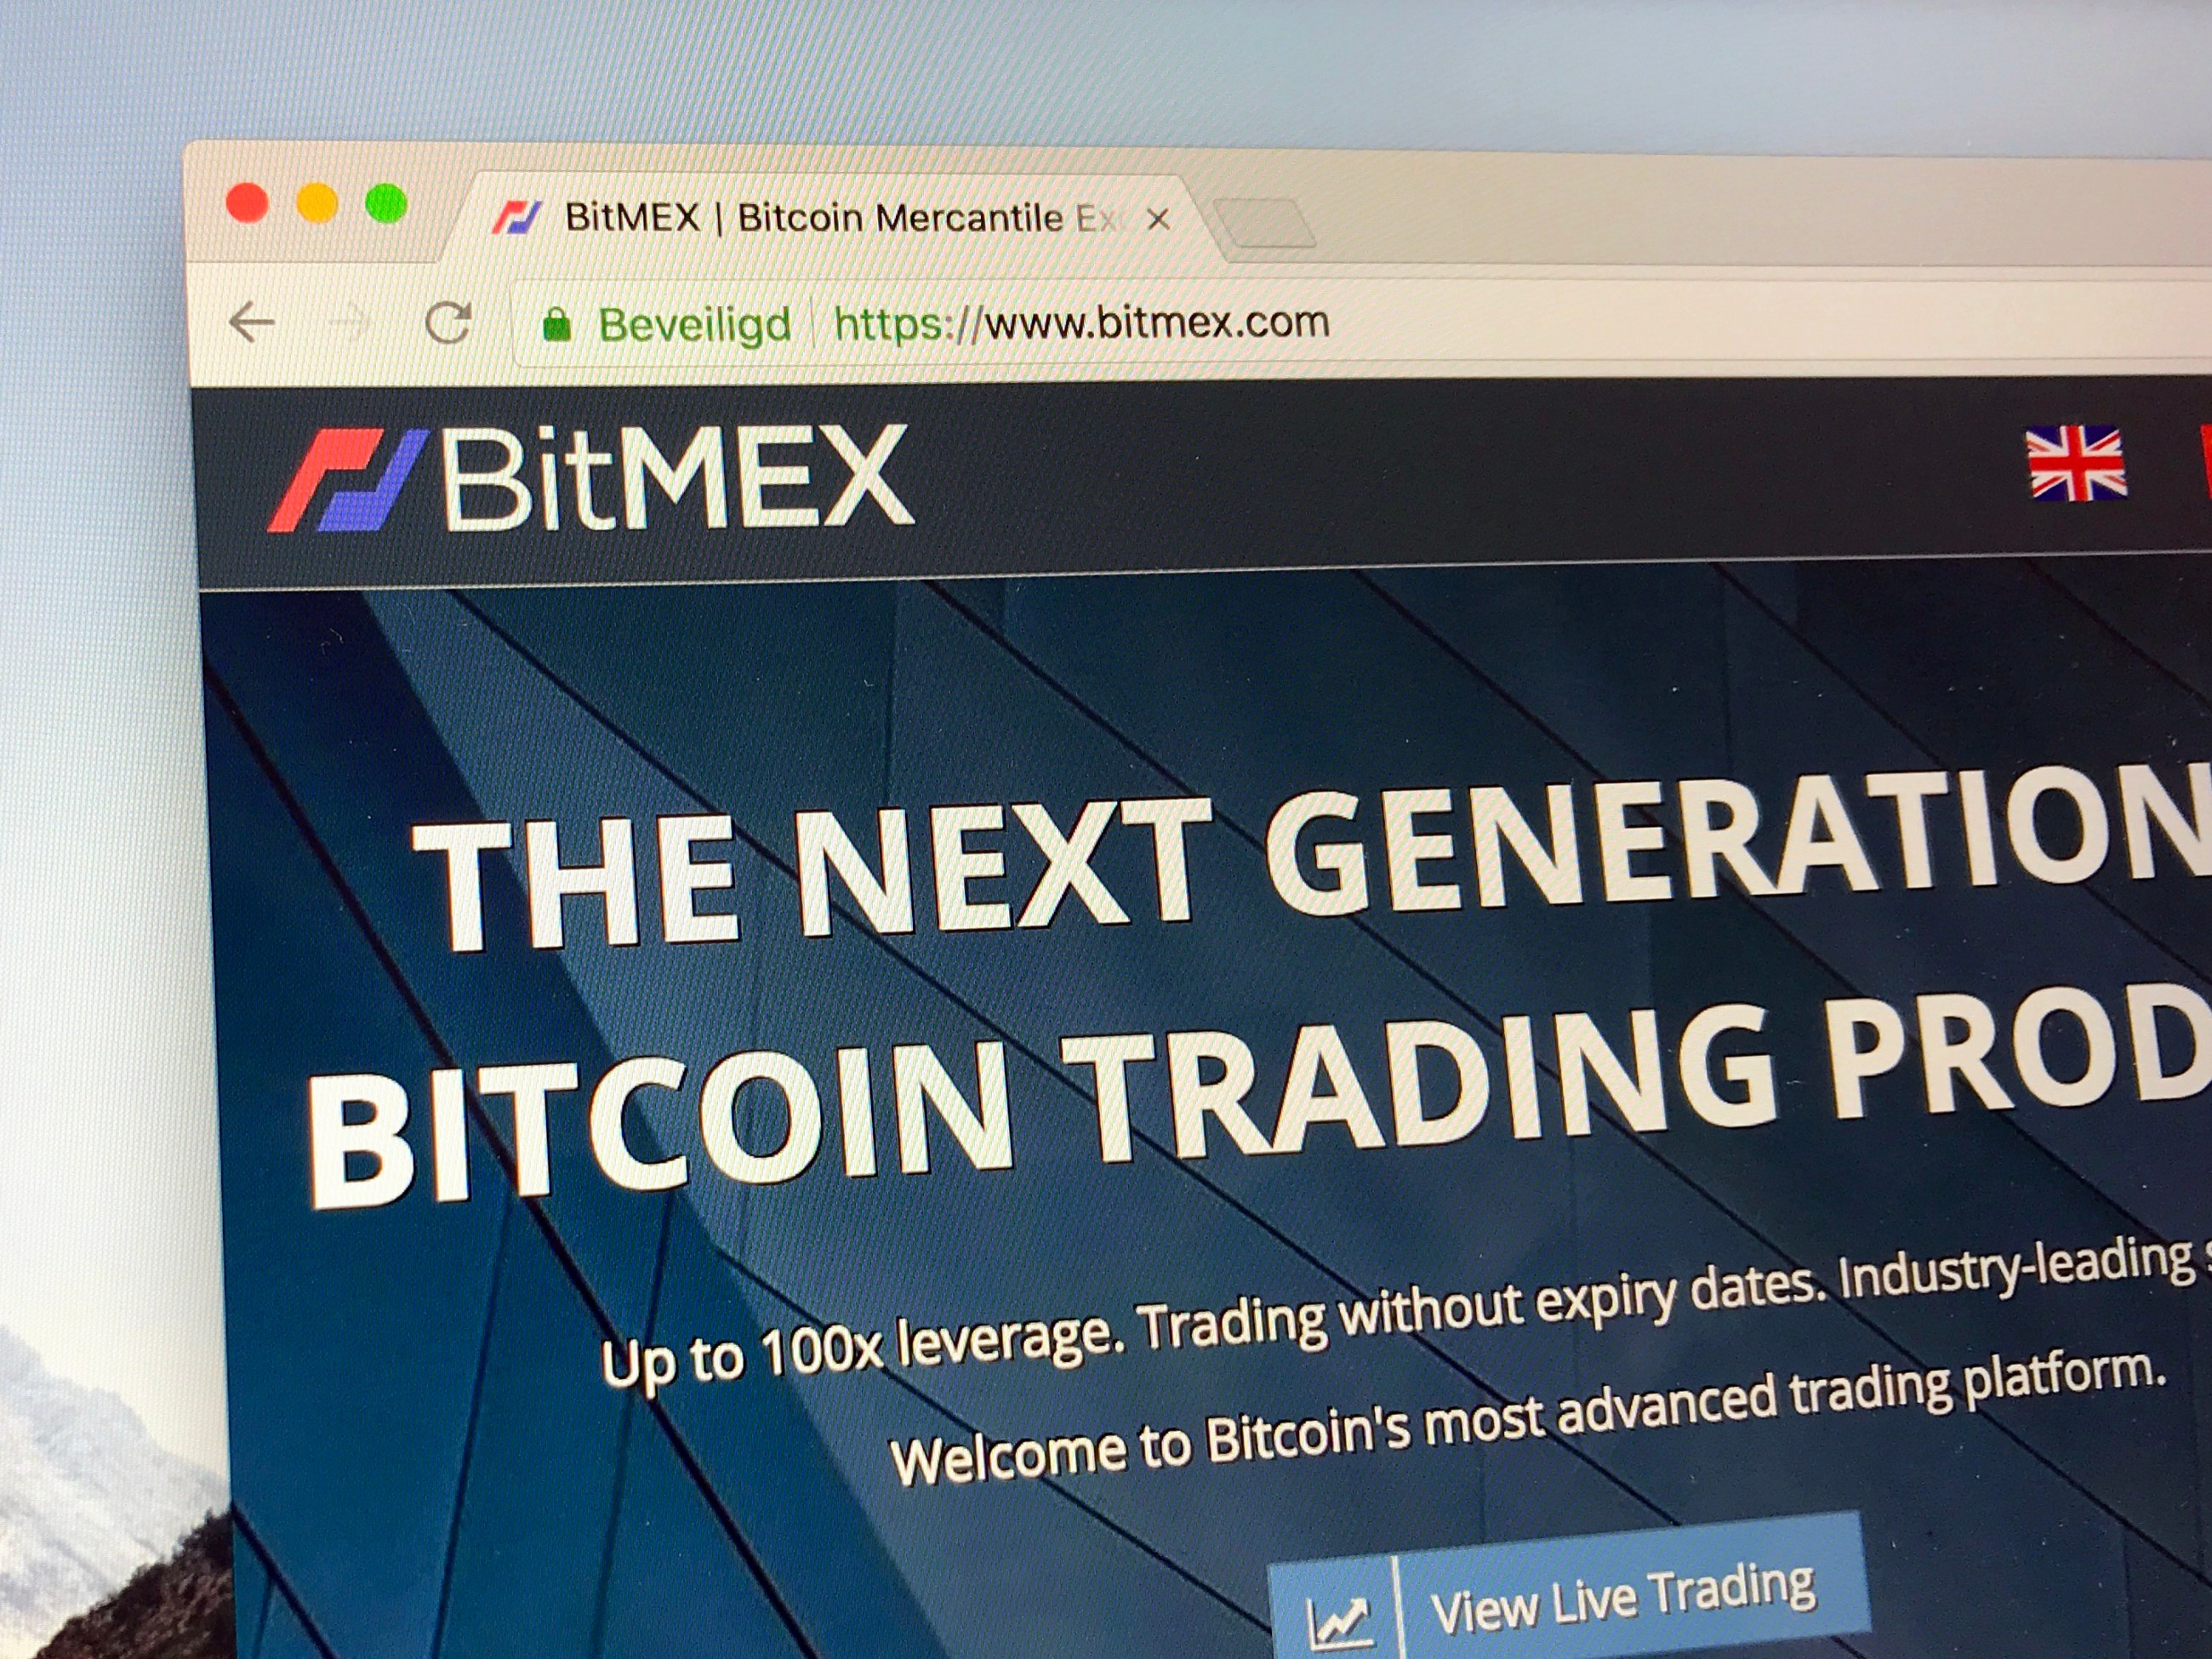 what are the penalties for a us resident using bitmex